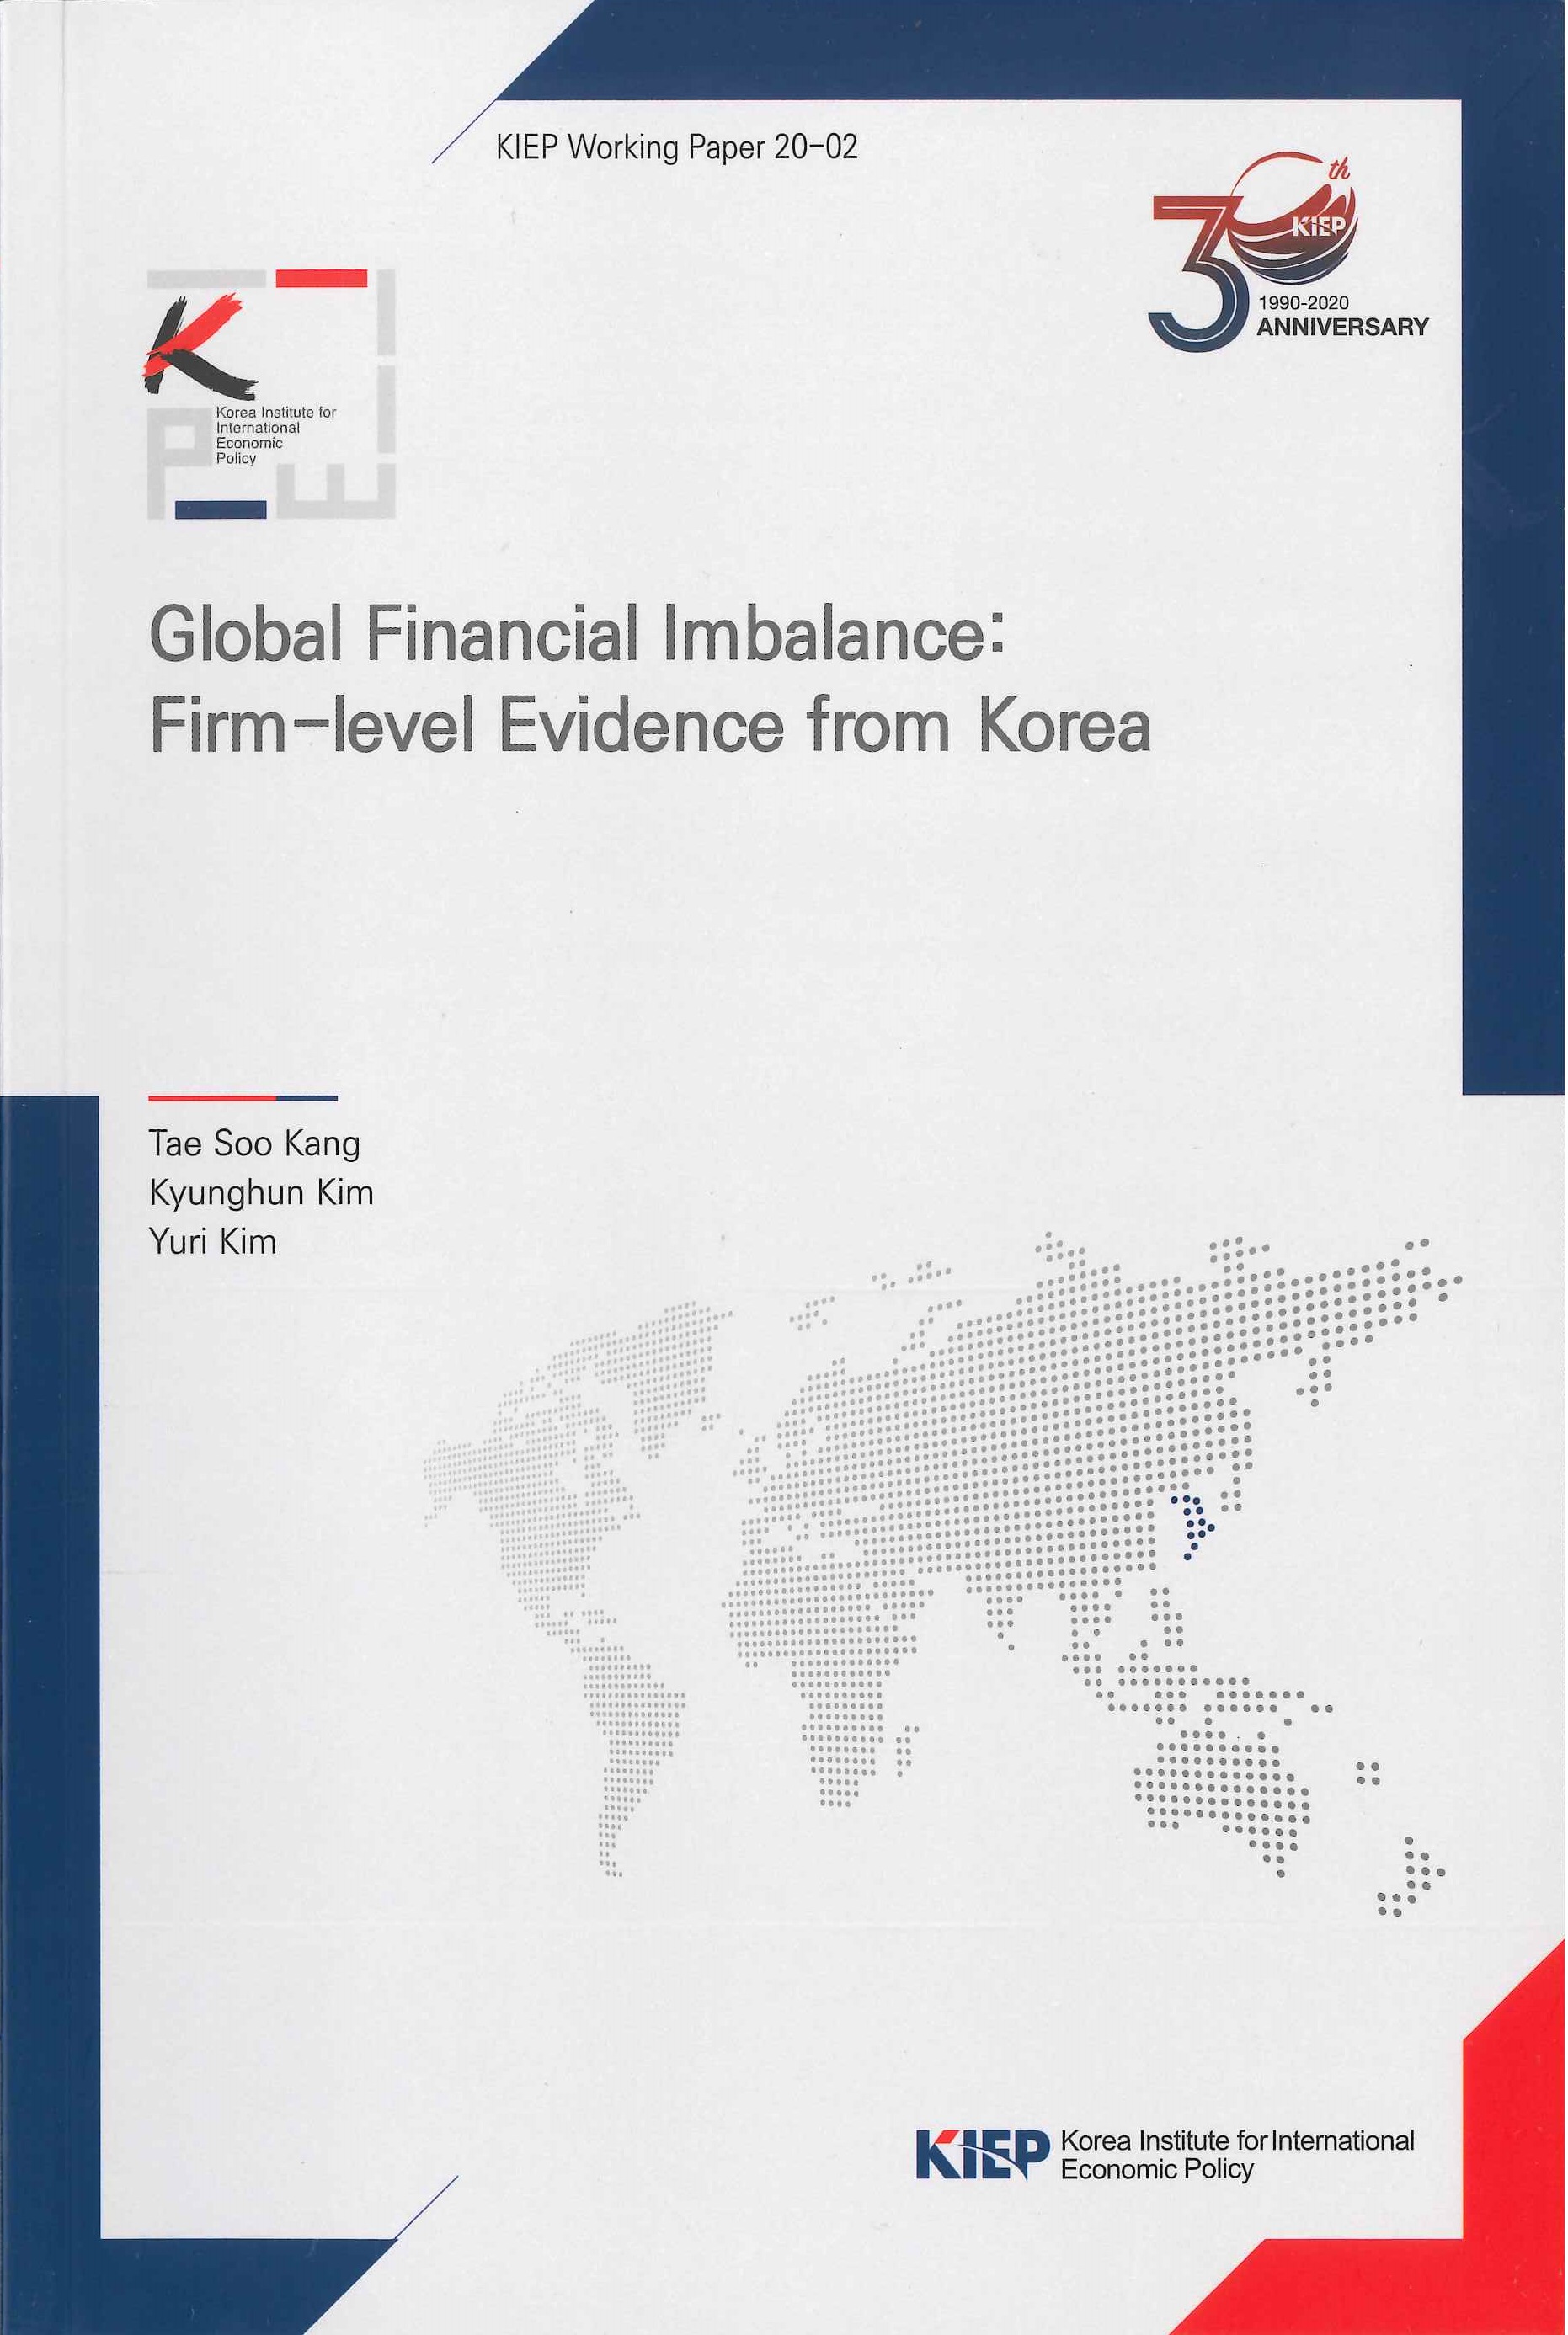 Global financial lmbalance:firm-level evidence from Korea